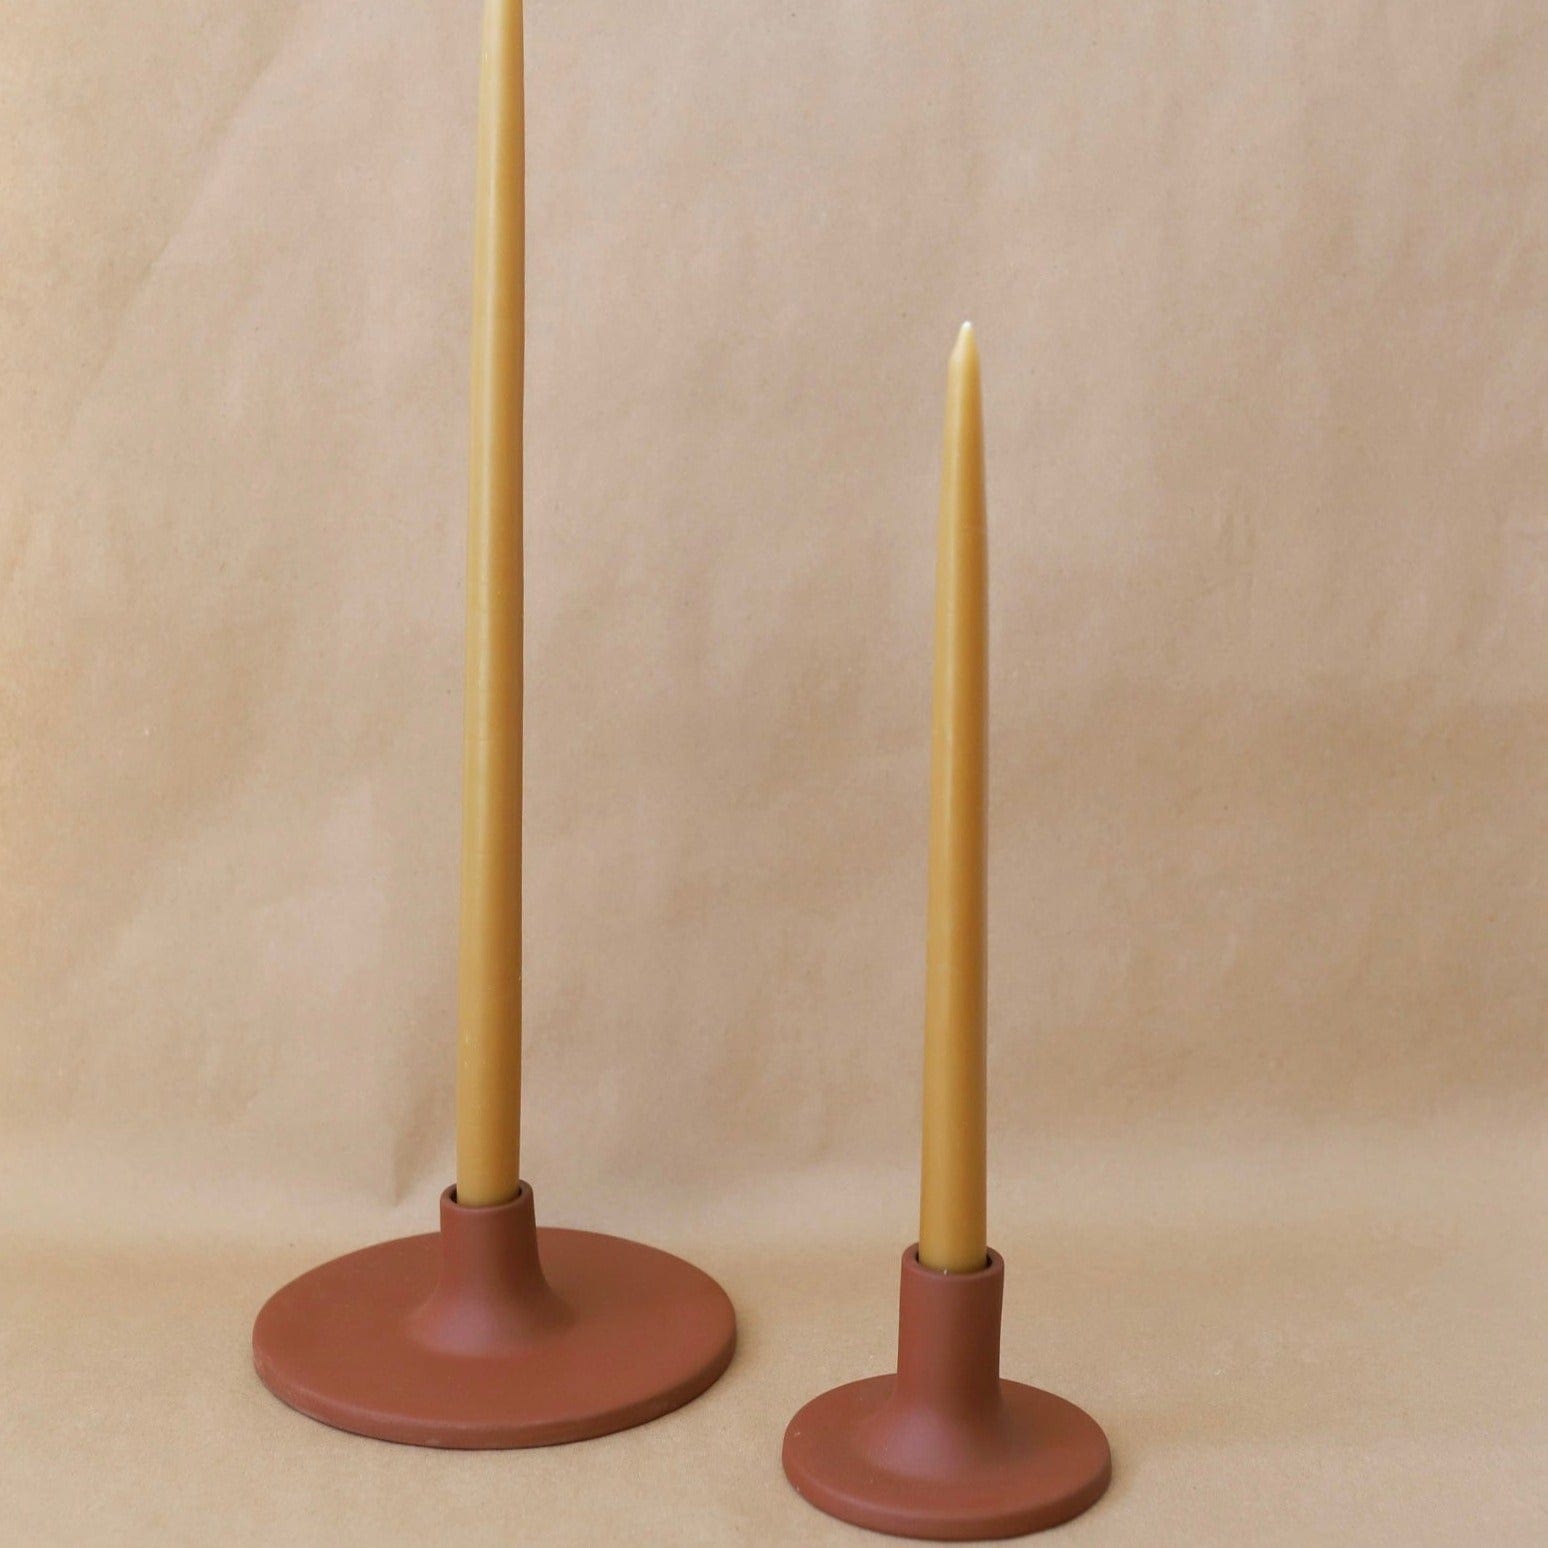 Floral Society Decor Miel / 12" Taper Candles Set by Floral Society